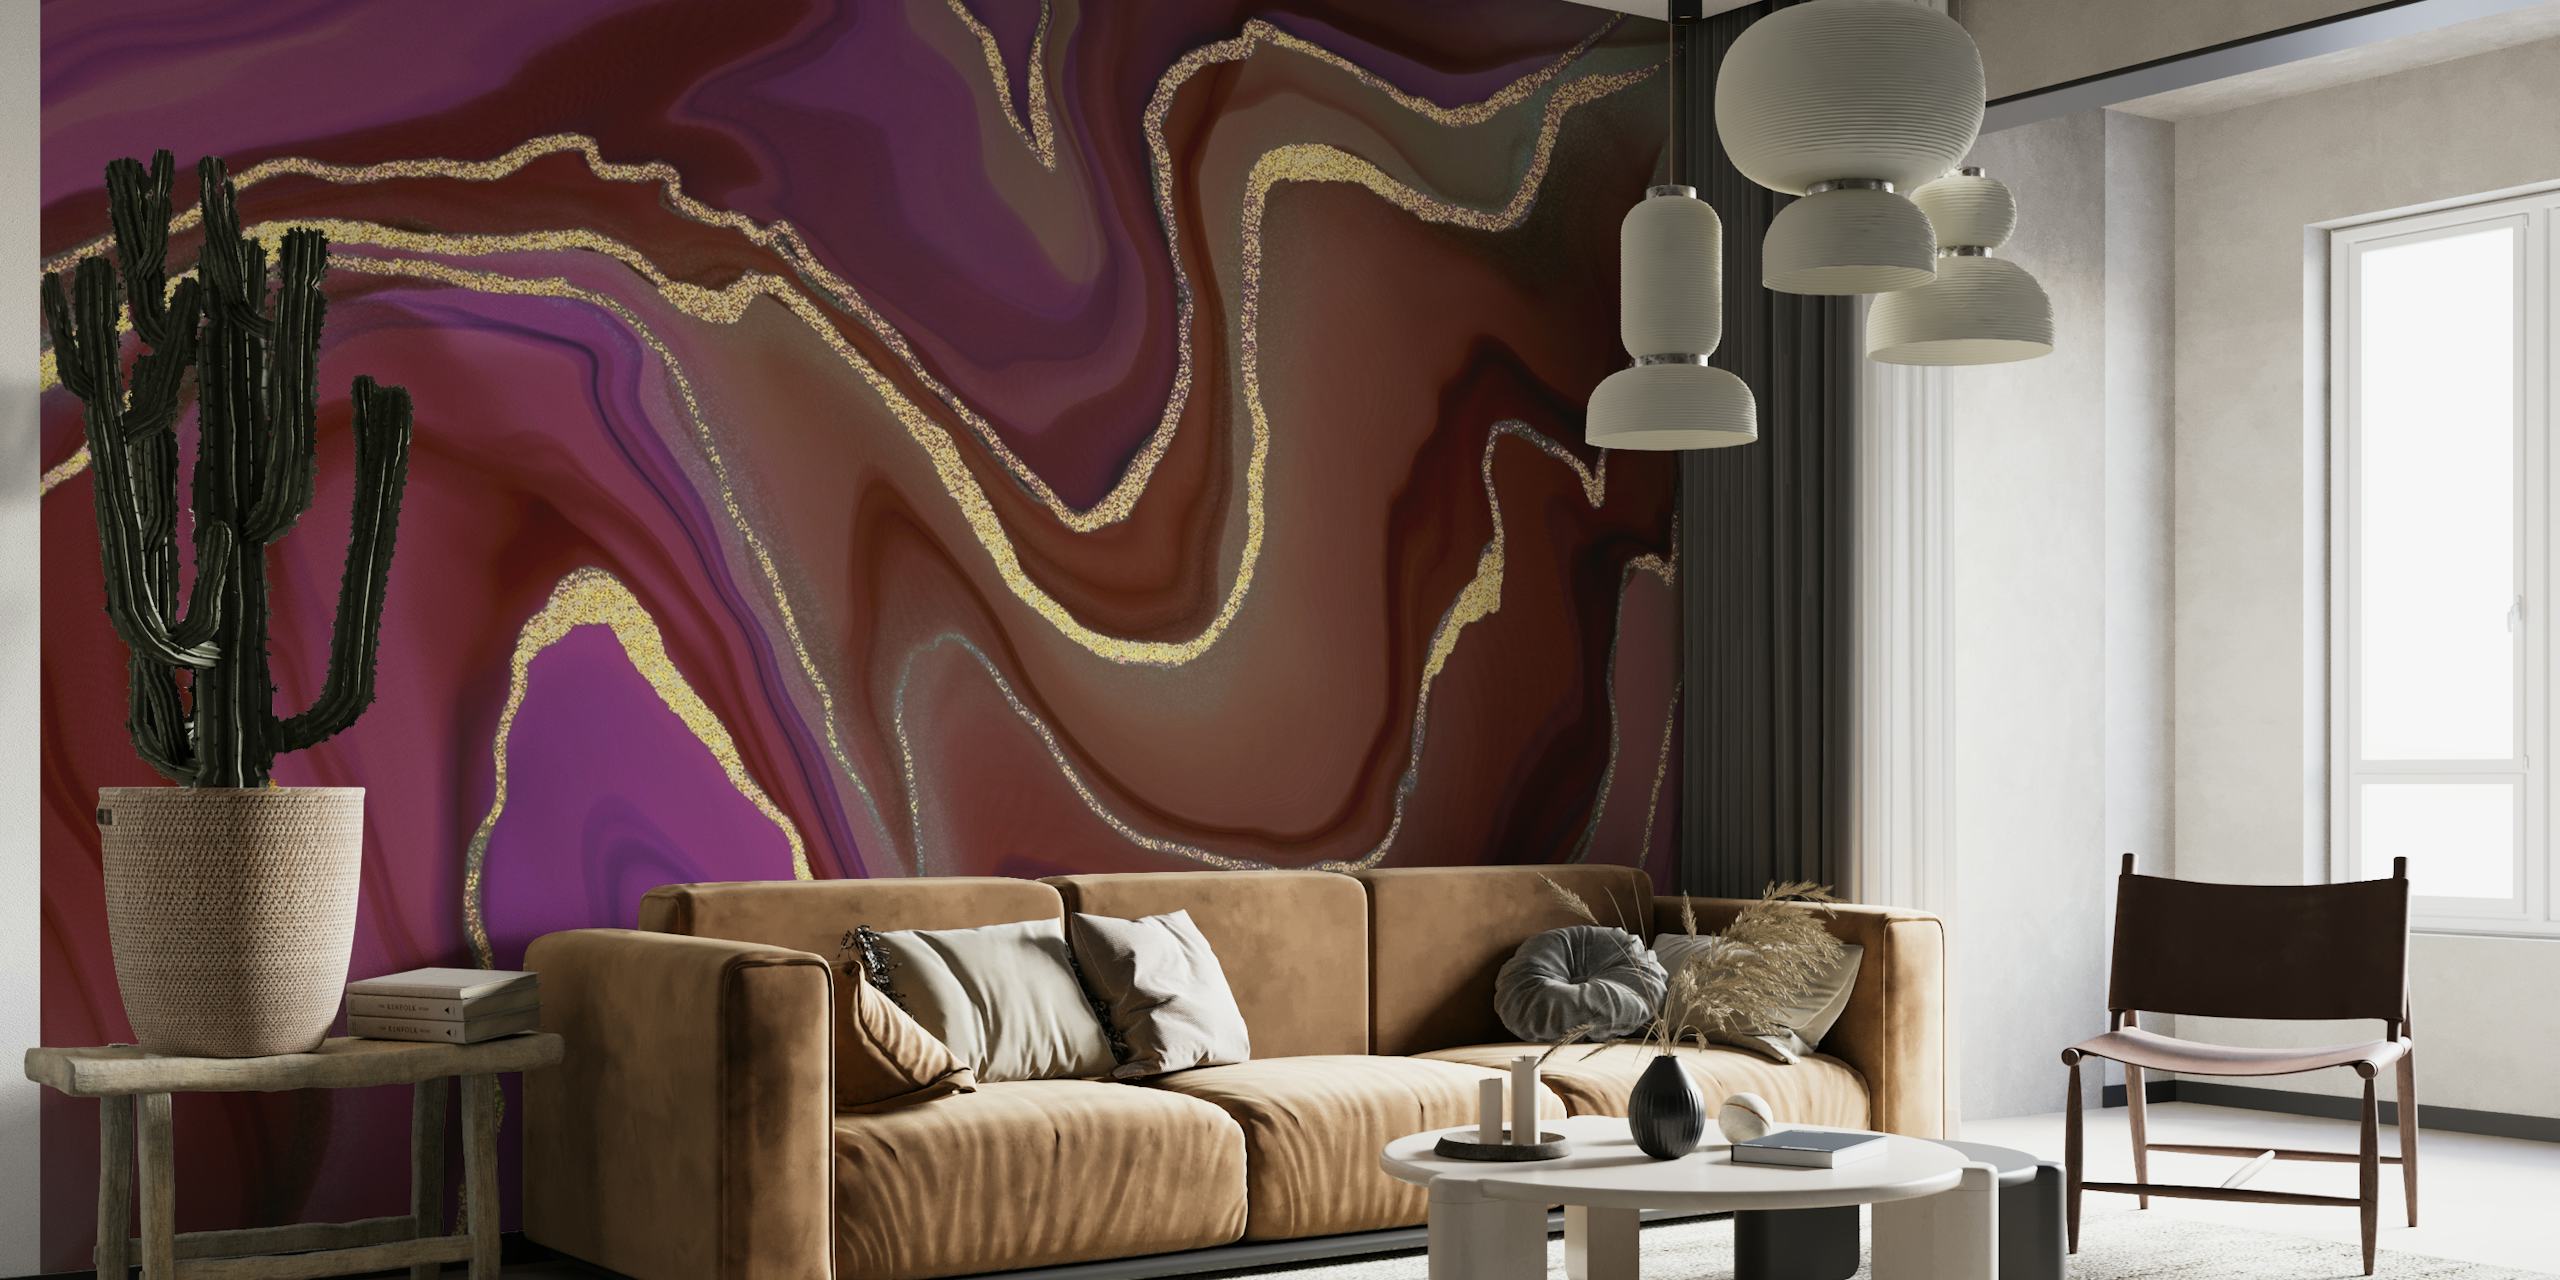 Faux Marble Red Pink Ombre wall mural showing luxurious swirls of red and pink in a marble-like pattern